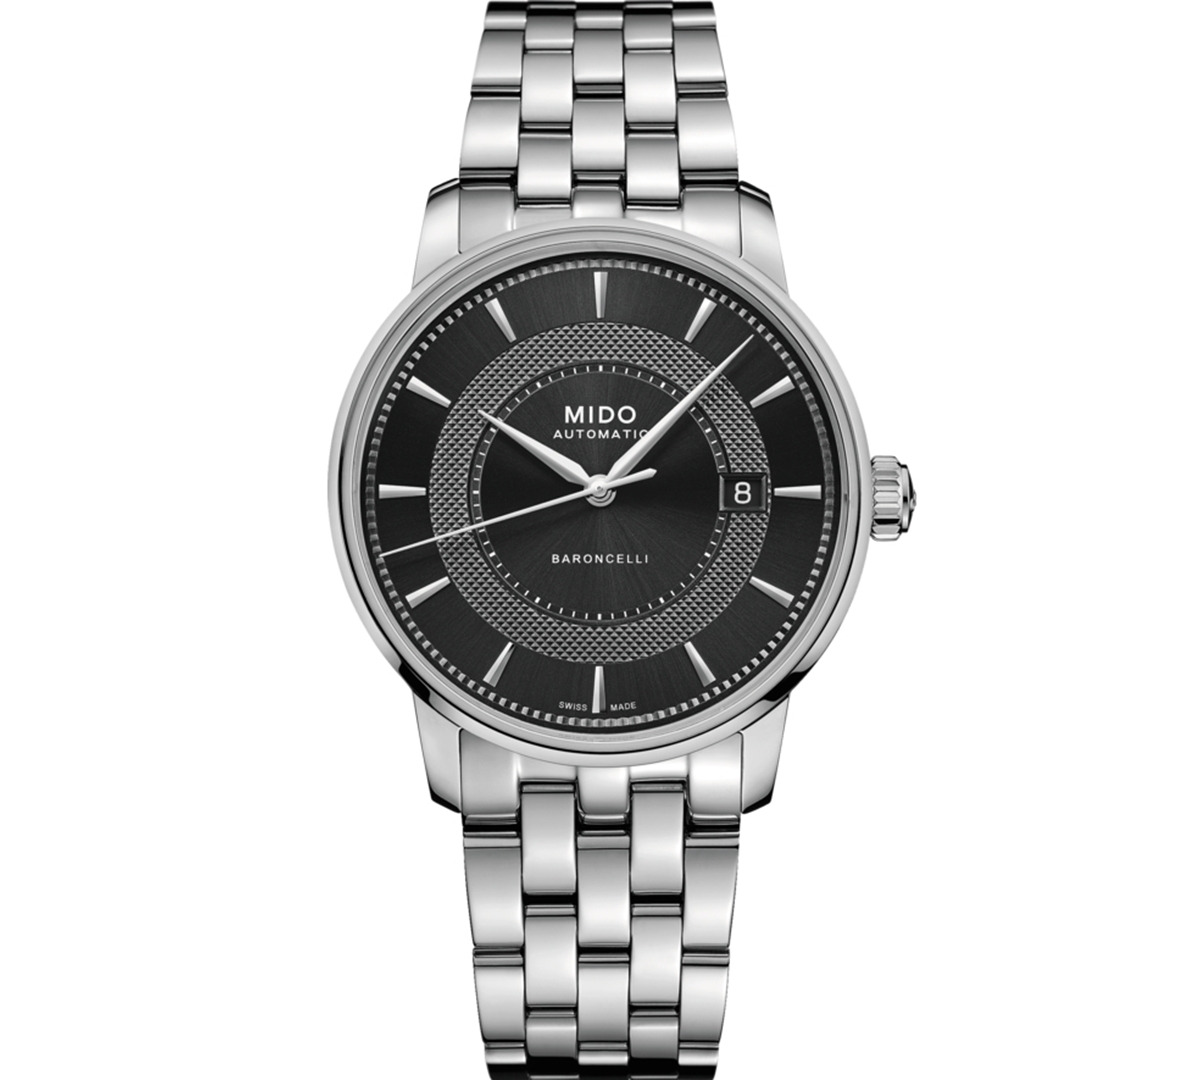 Mido Men's Swiss Automatic Baroncelli Signature Stainless Steel Bracelet Watch 39mm In Silver